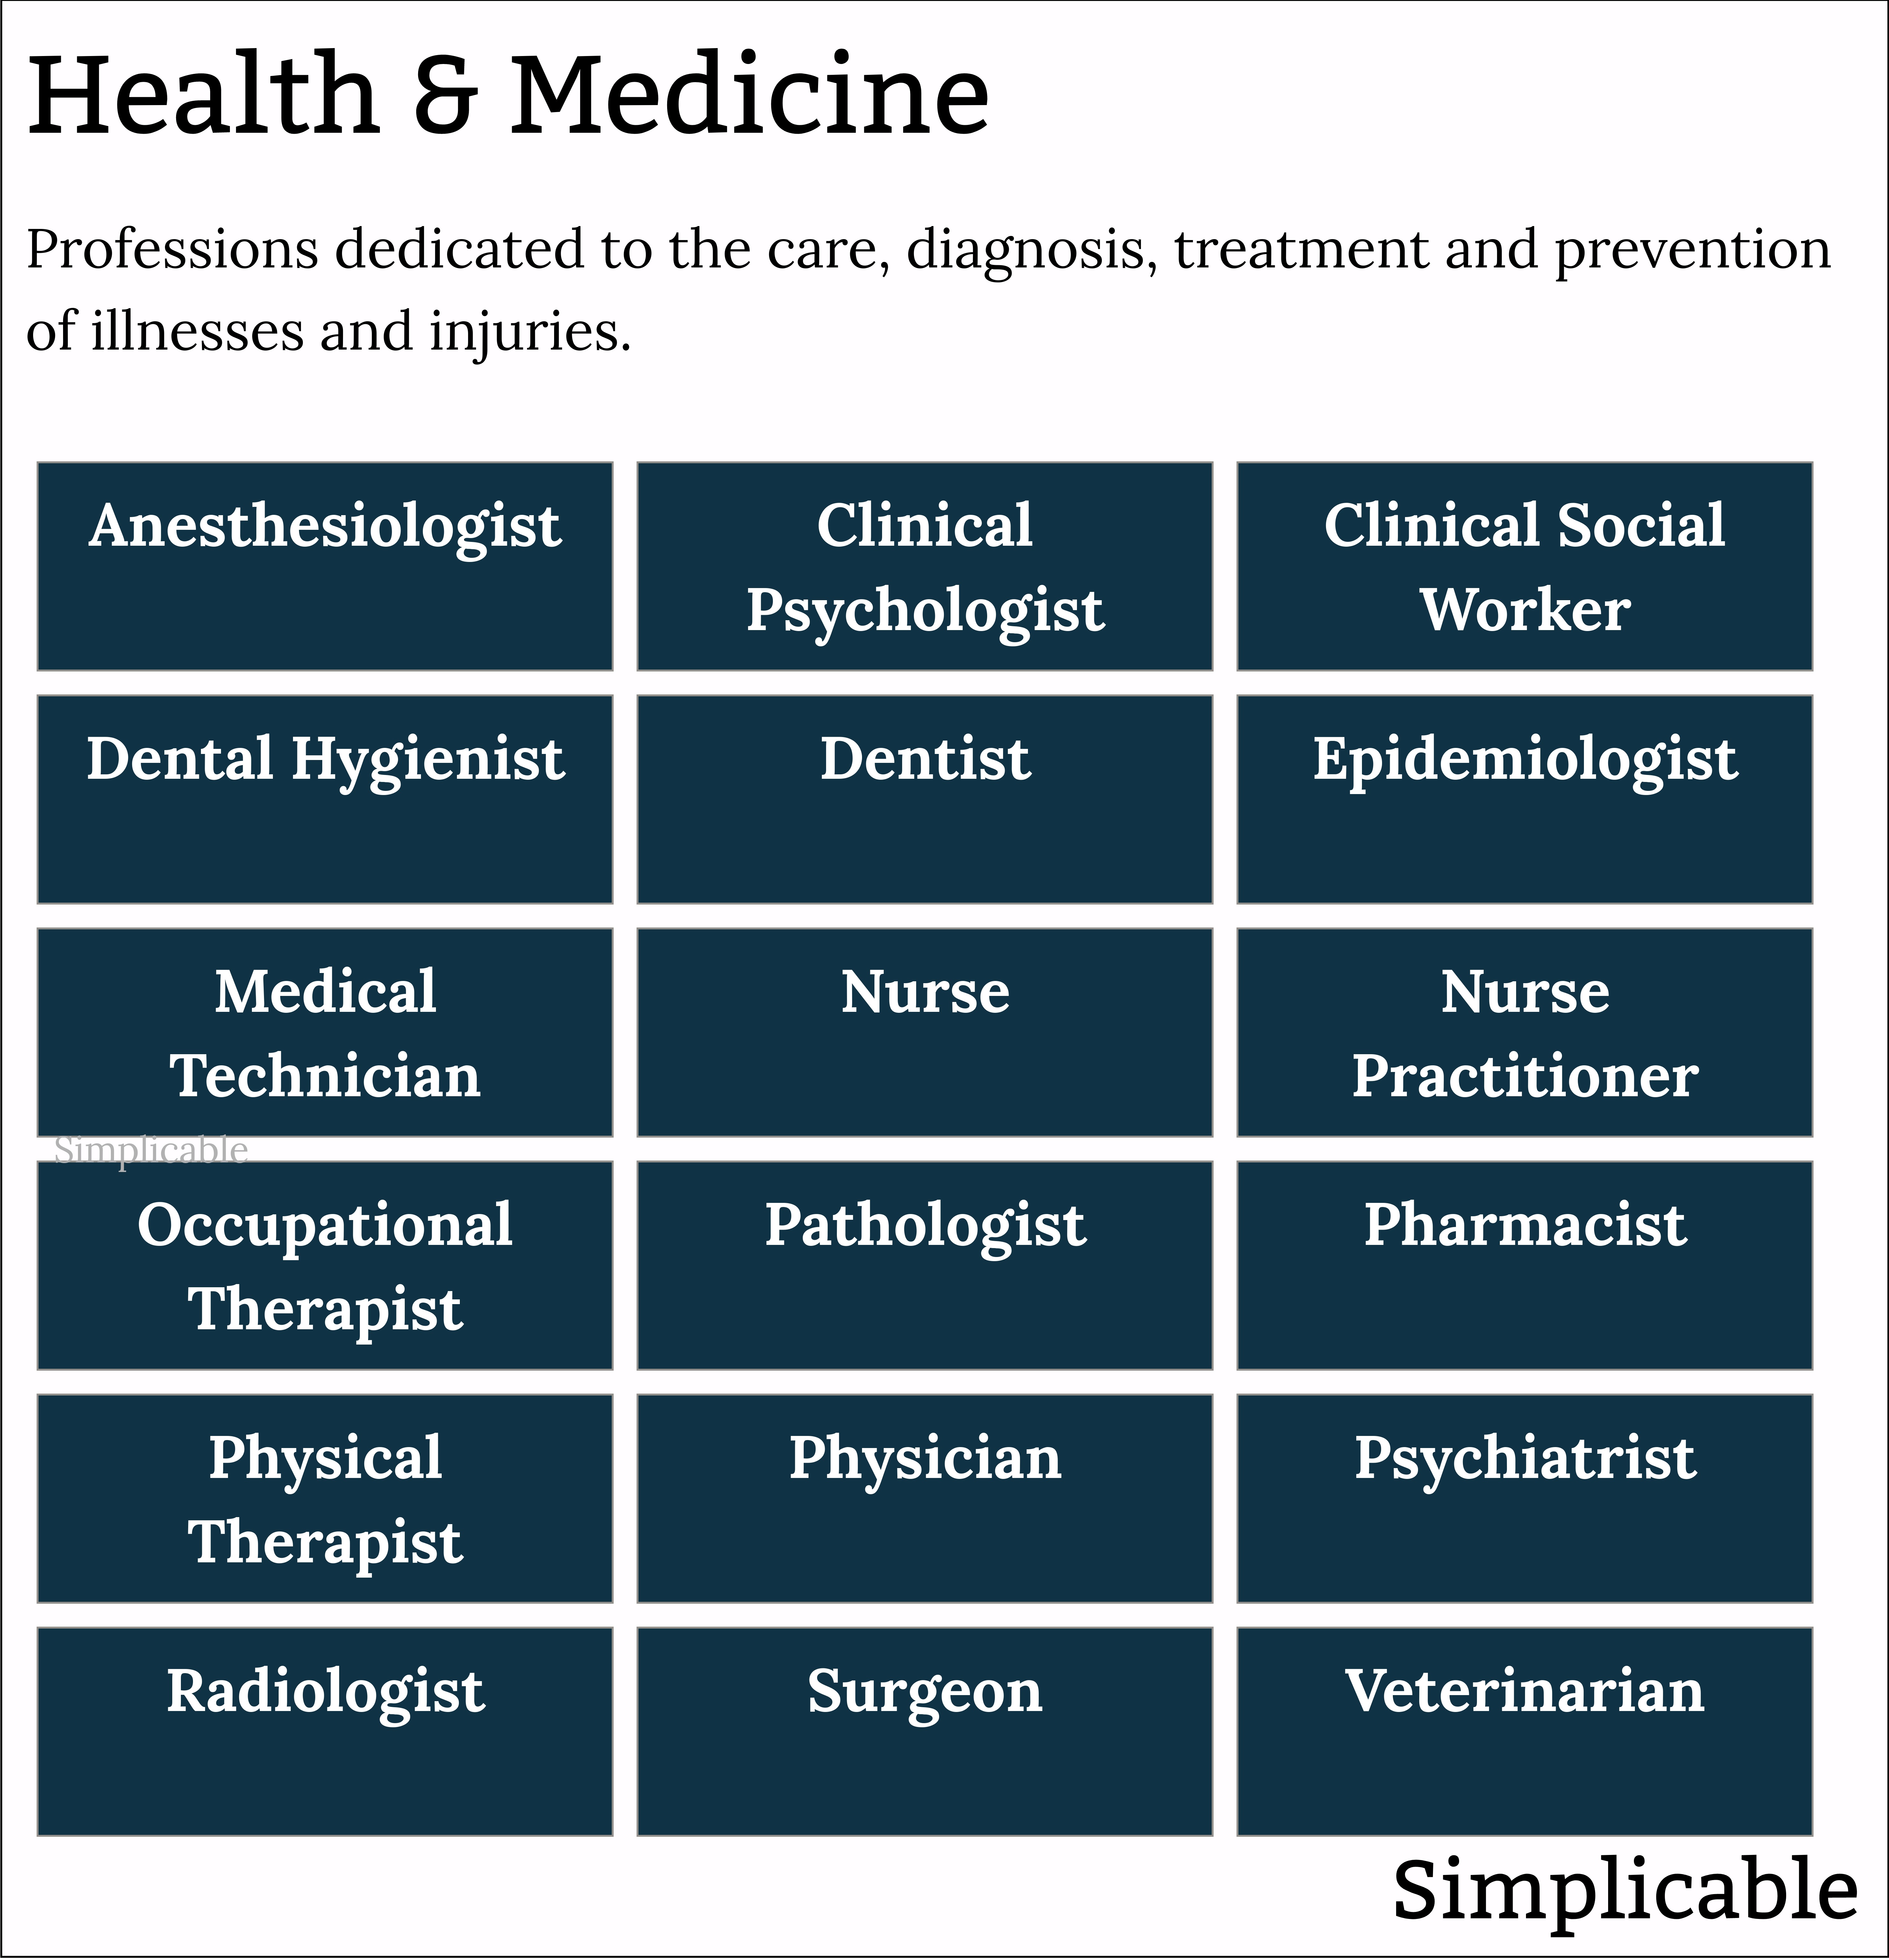 professions related to health and medicine